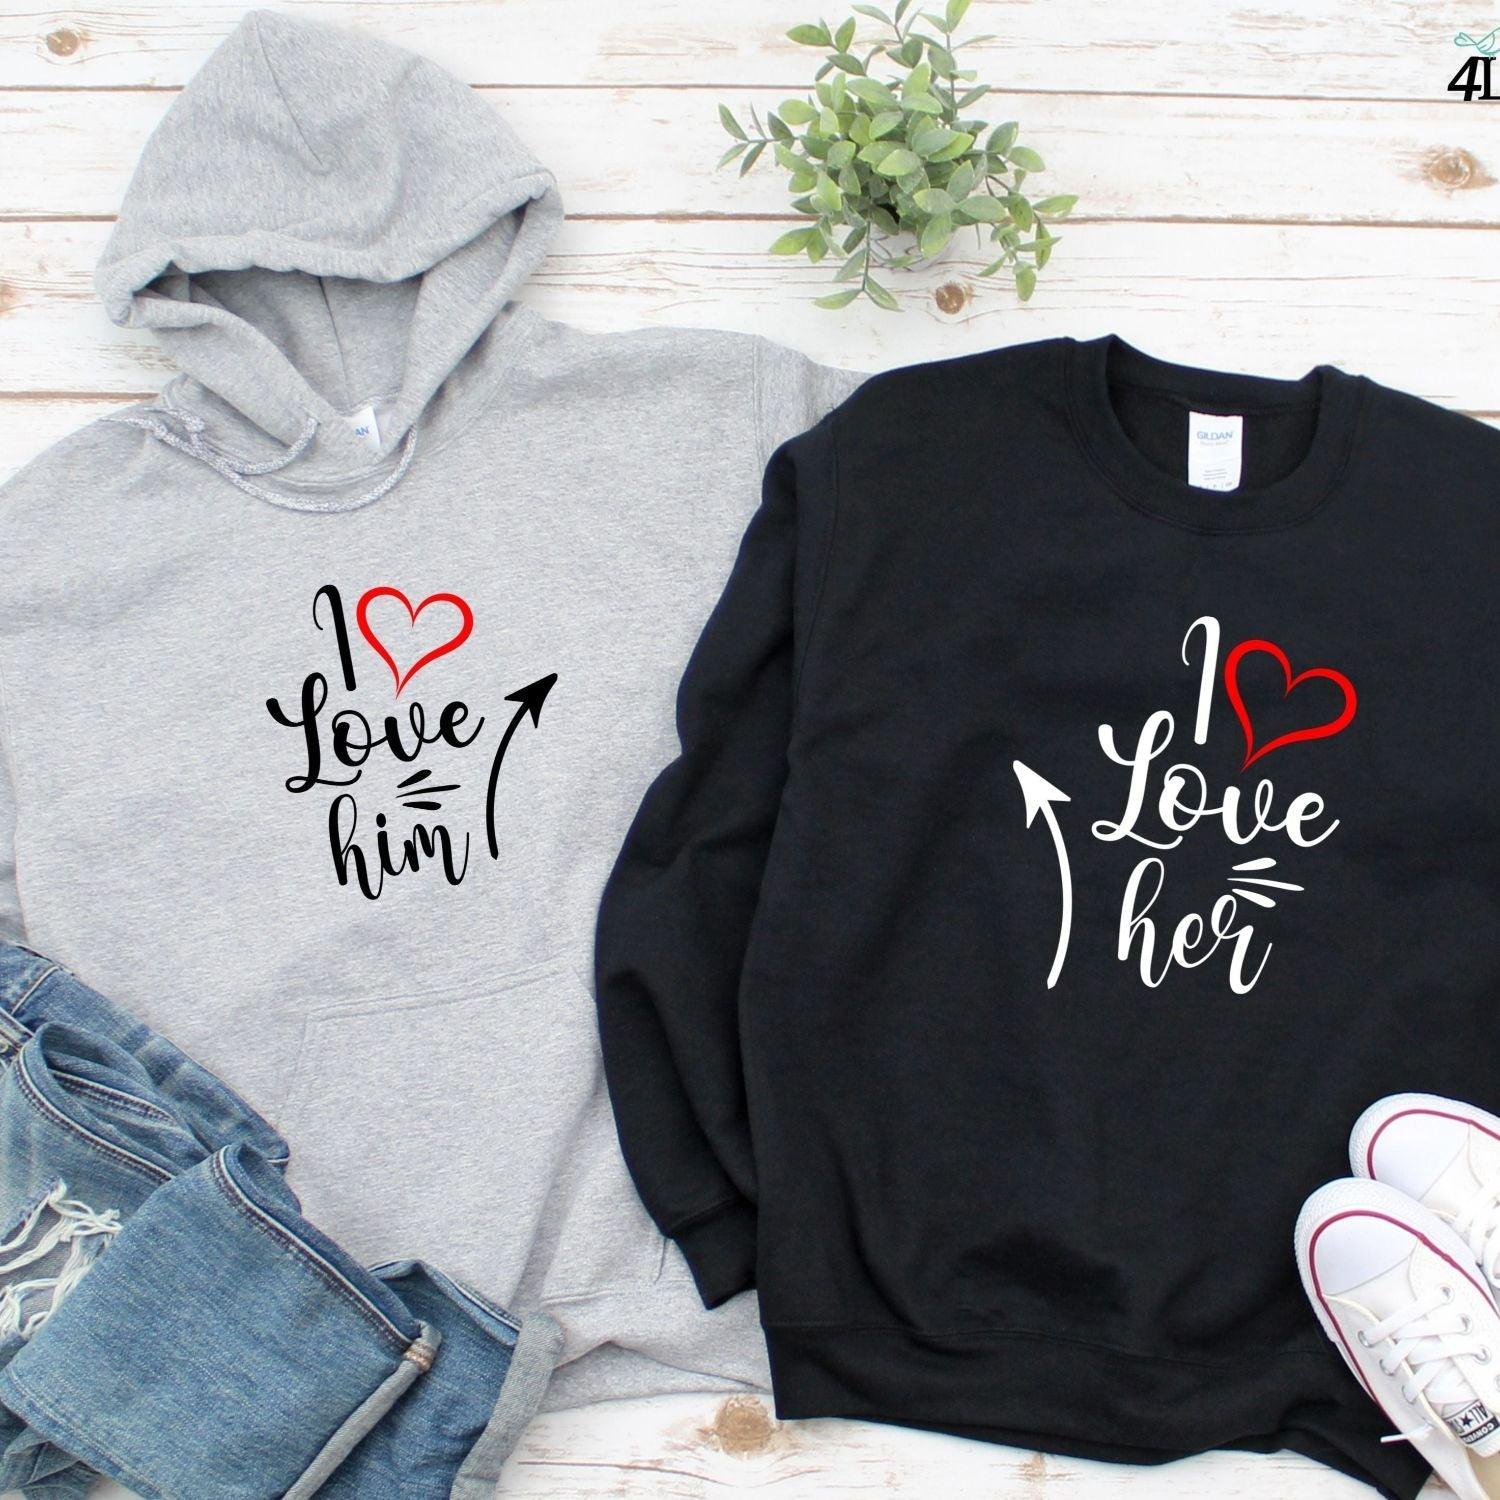 Cute Couples' Matching Outfits: Adorable I Love Him/Her Valentine Set, Ideal Gift - 4Lovebirds